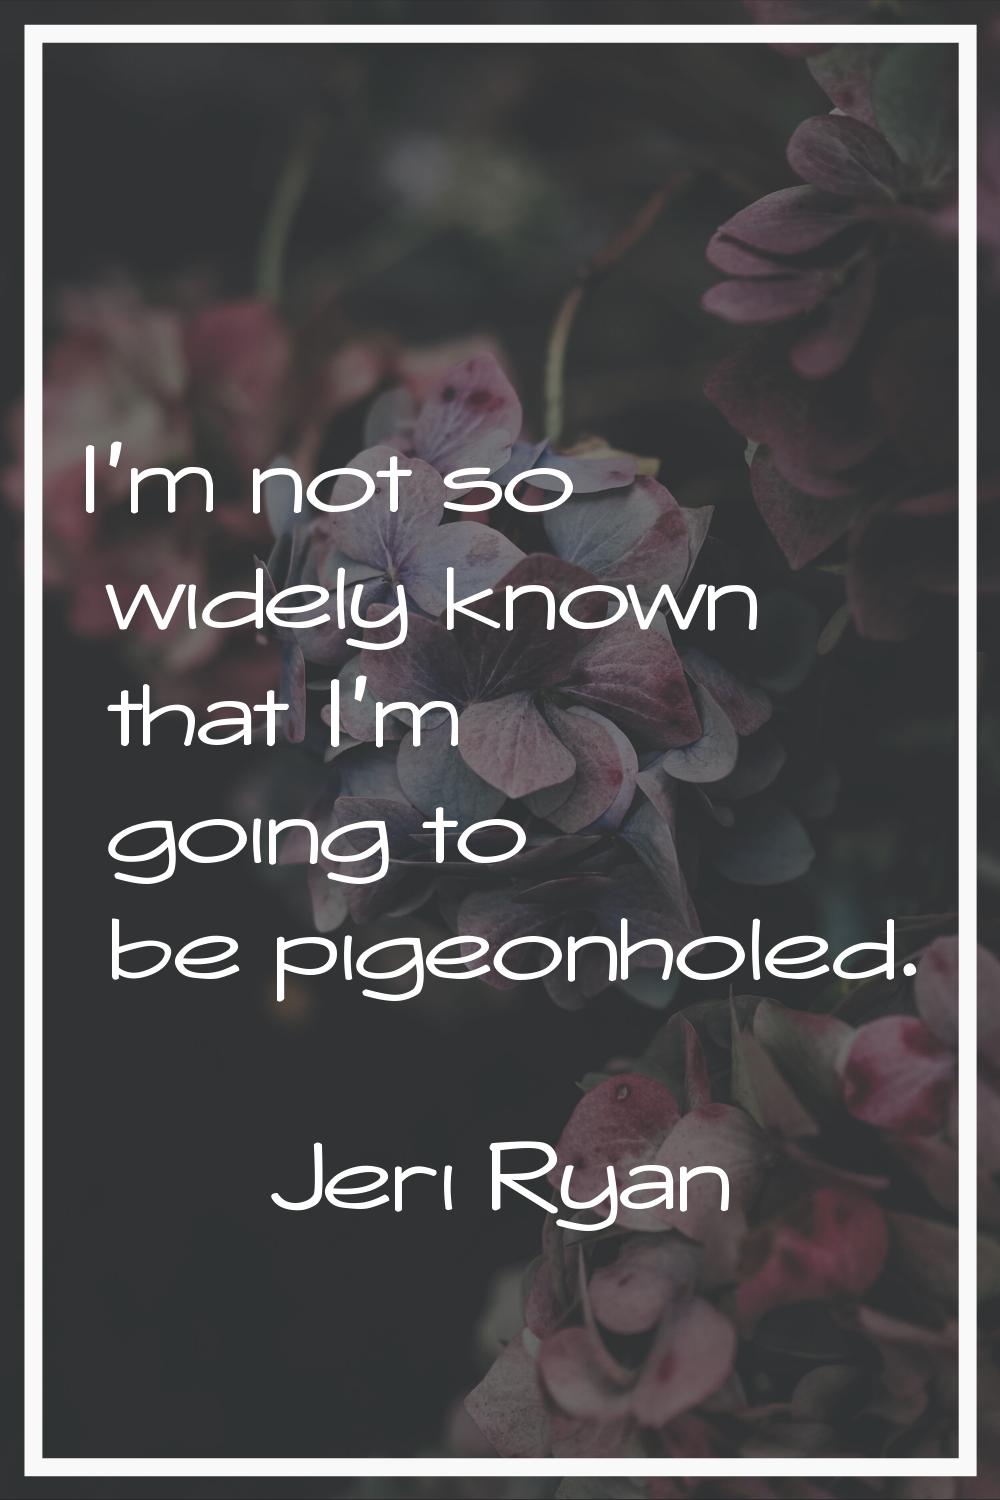 I'm not so widely known that I'm going to be pigeonholed.